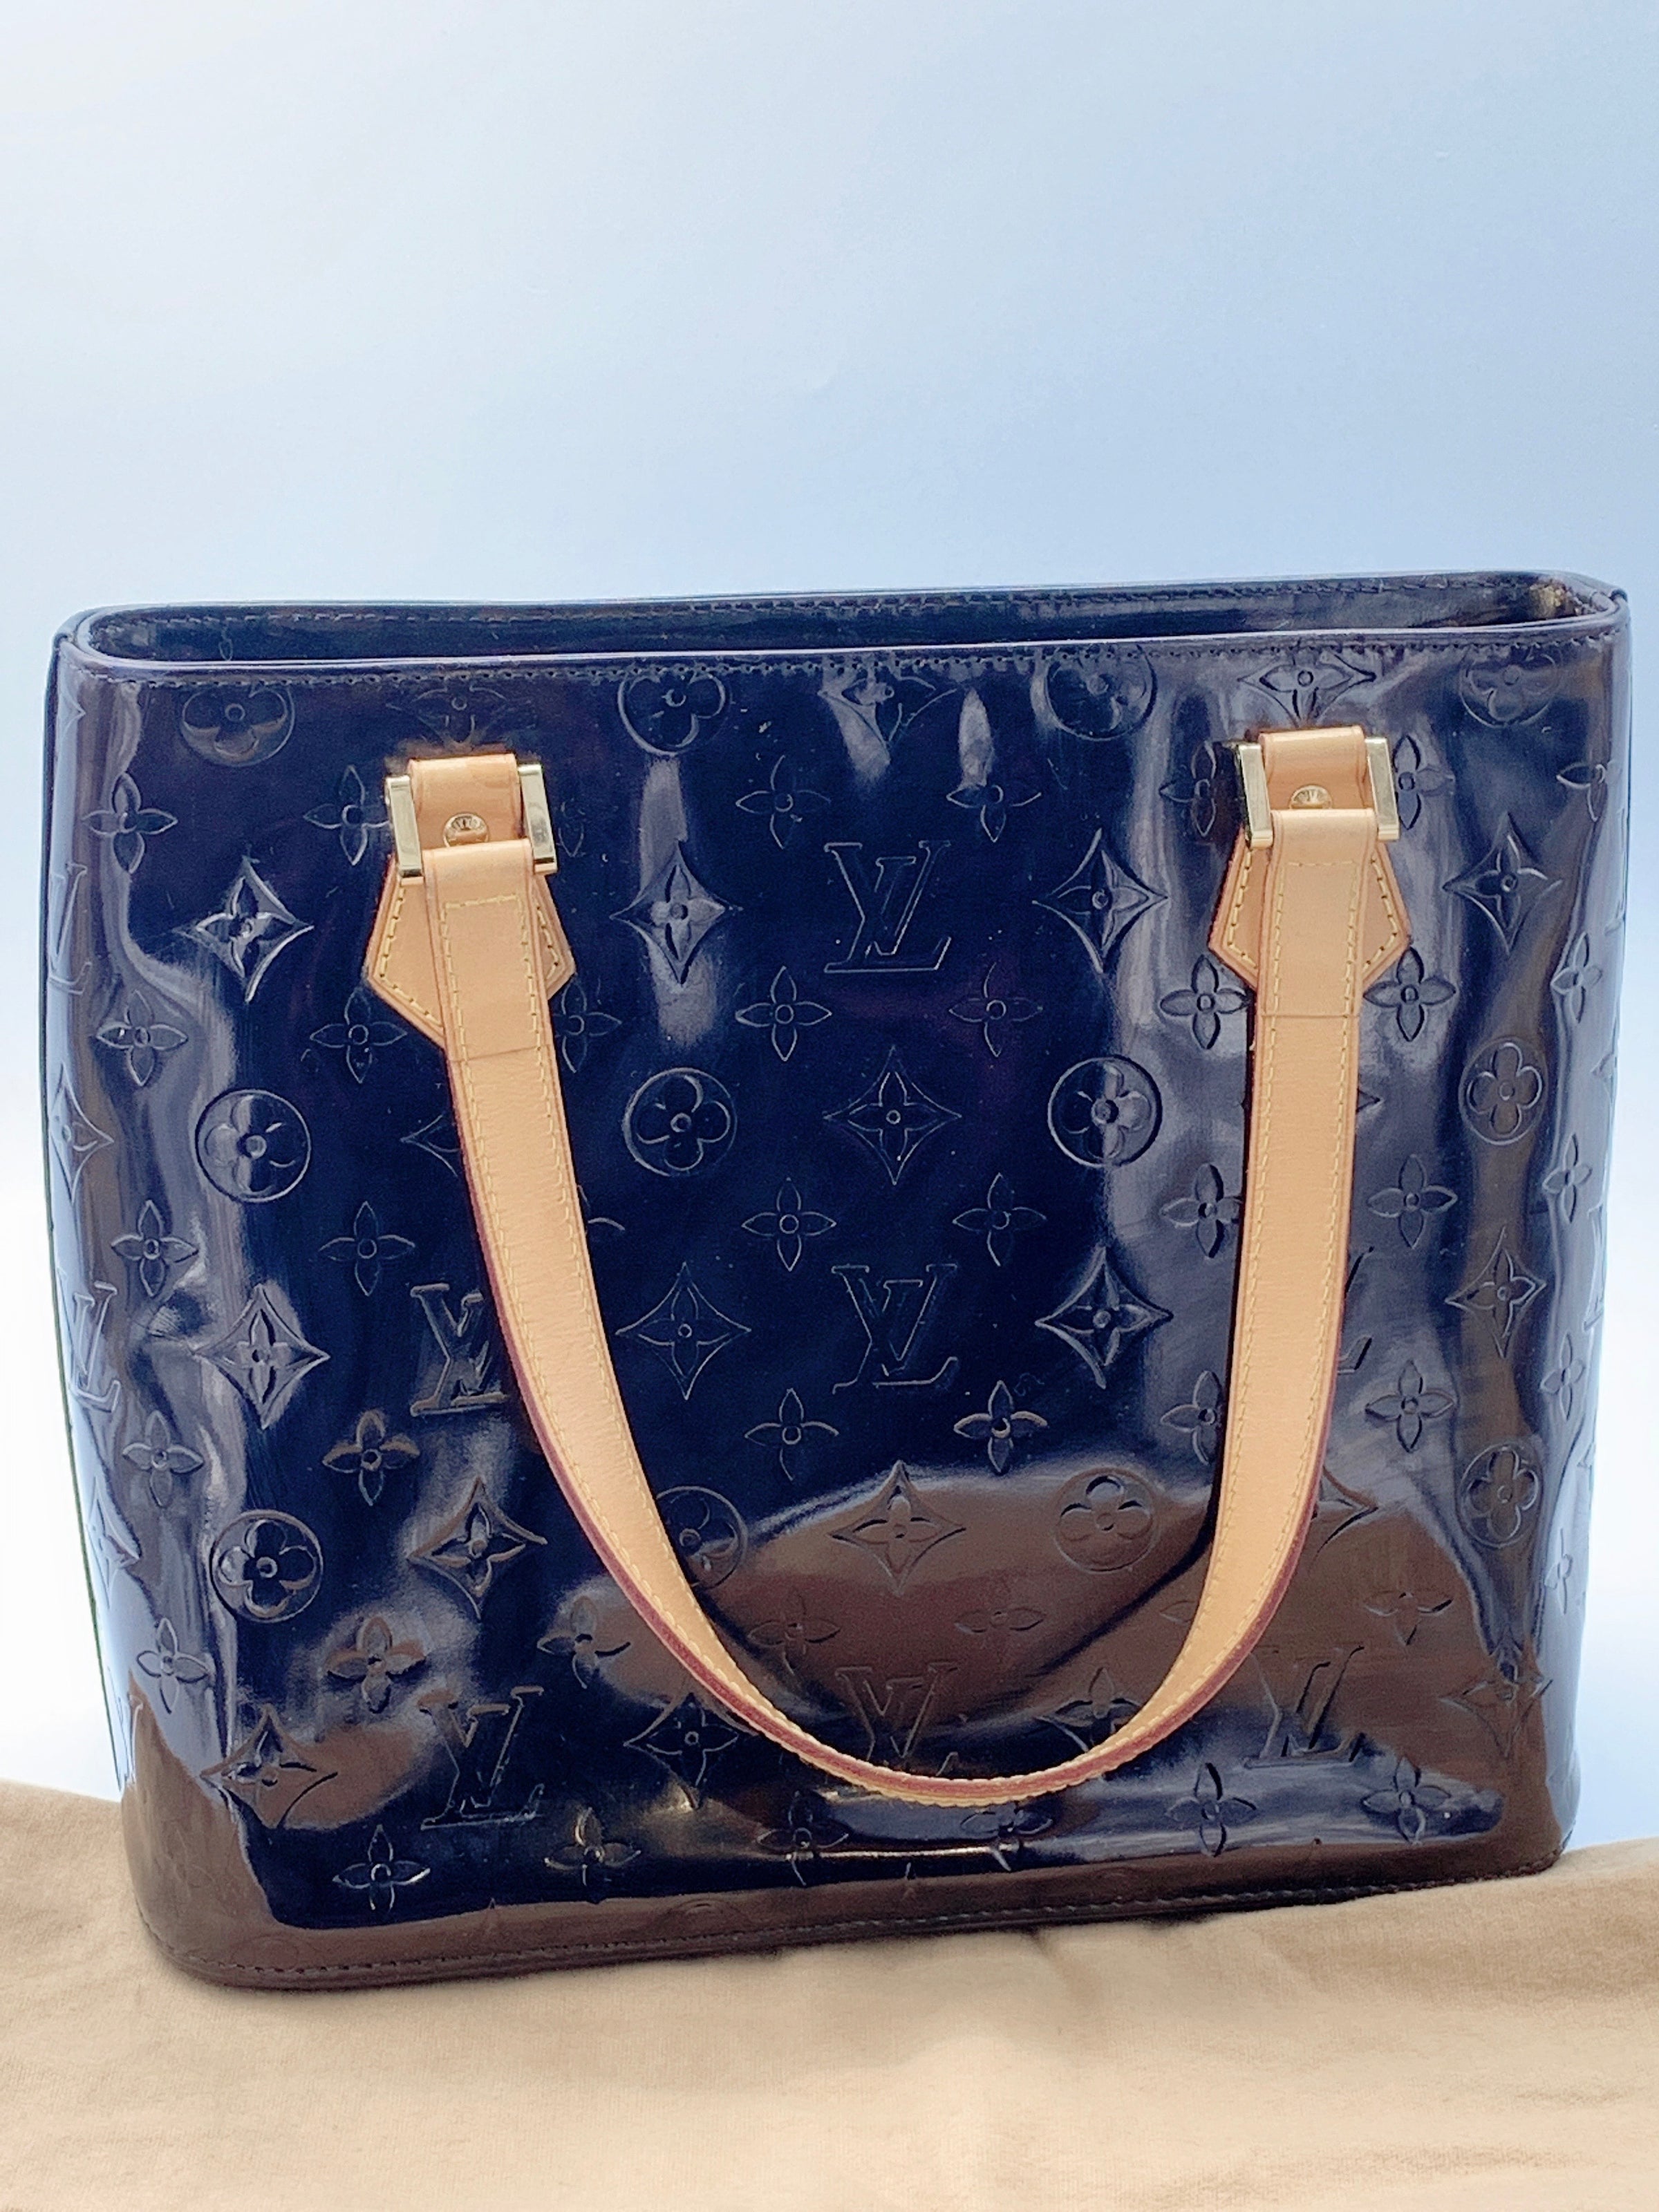 Sold at Auction: LOUIS VUITTON VERNIS HOUSTON LEATHER BAG; feature LV  monogram embossed vernis patent leather body, flat leather vachetta cowhide  s